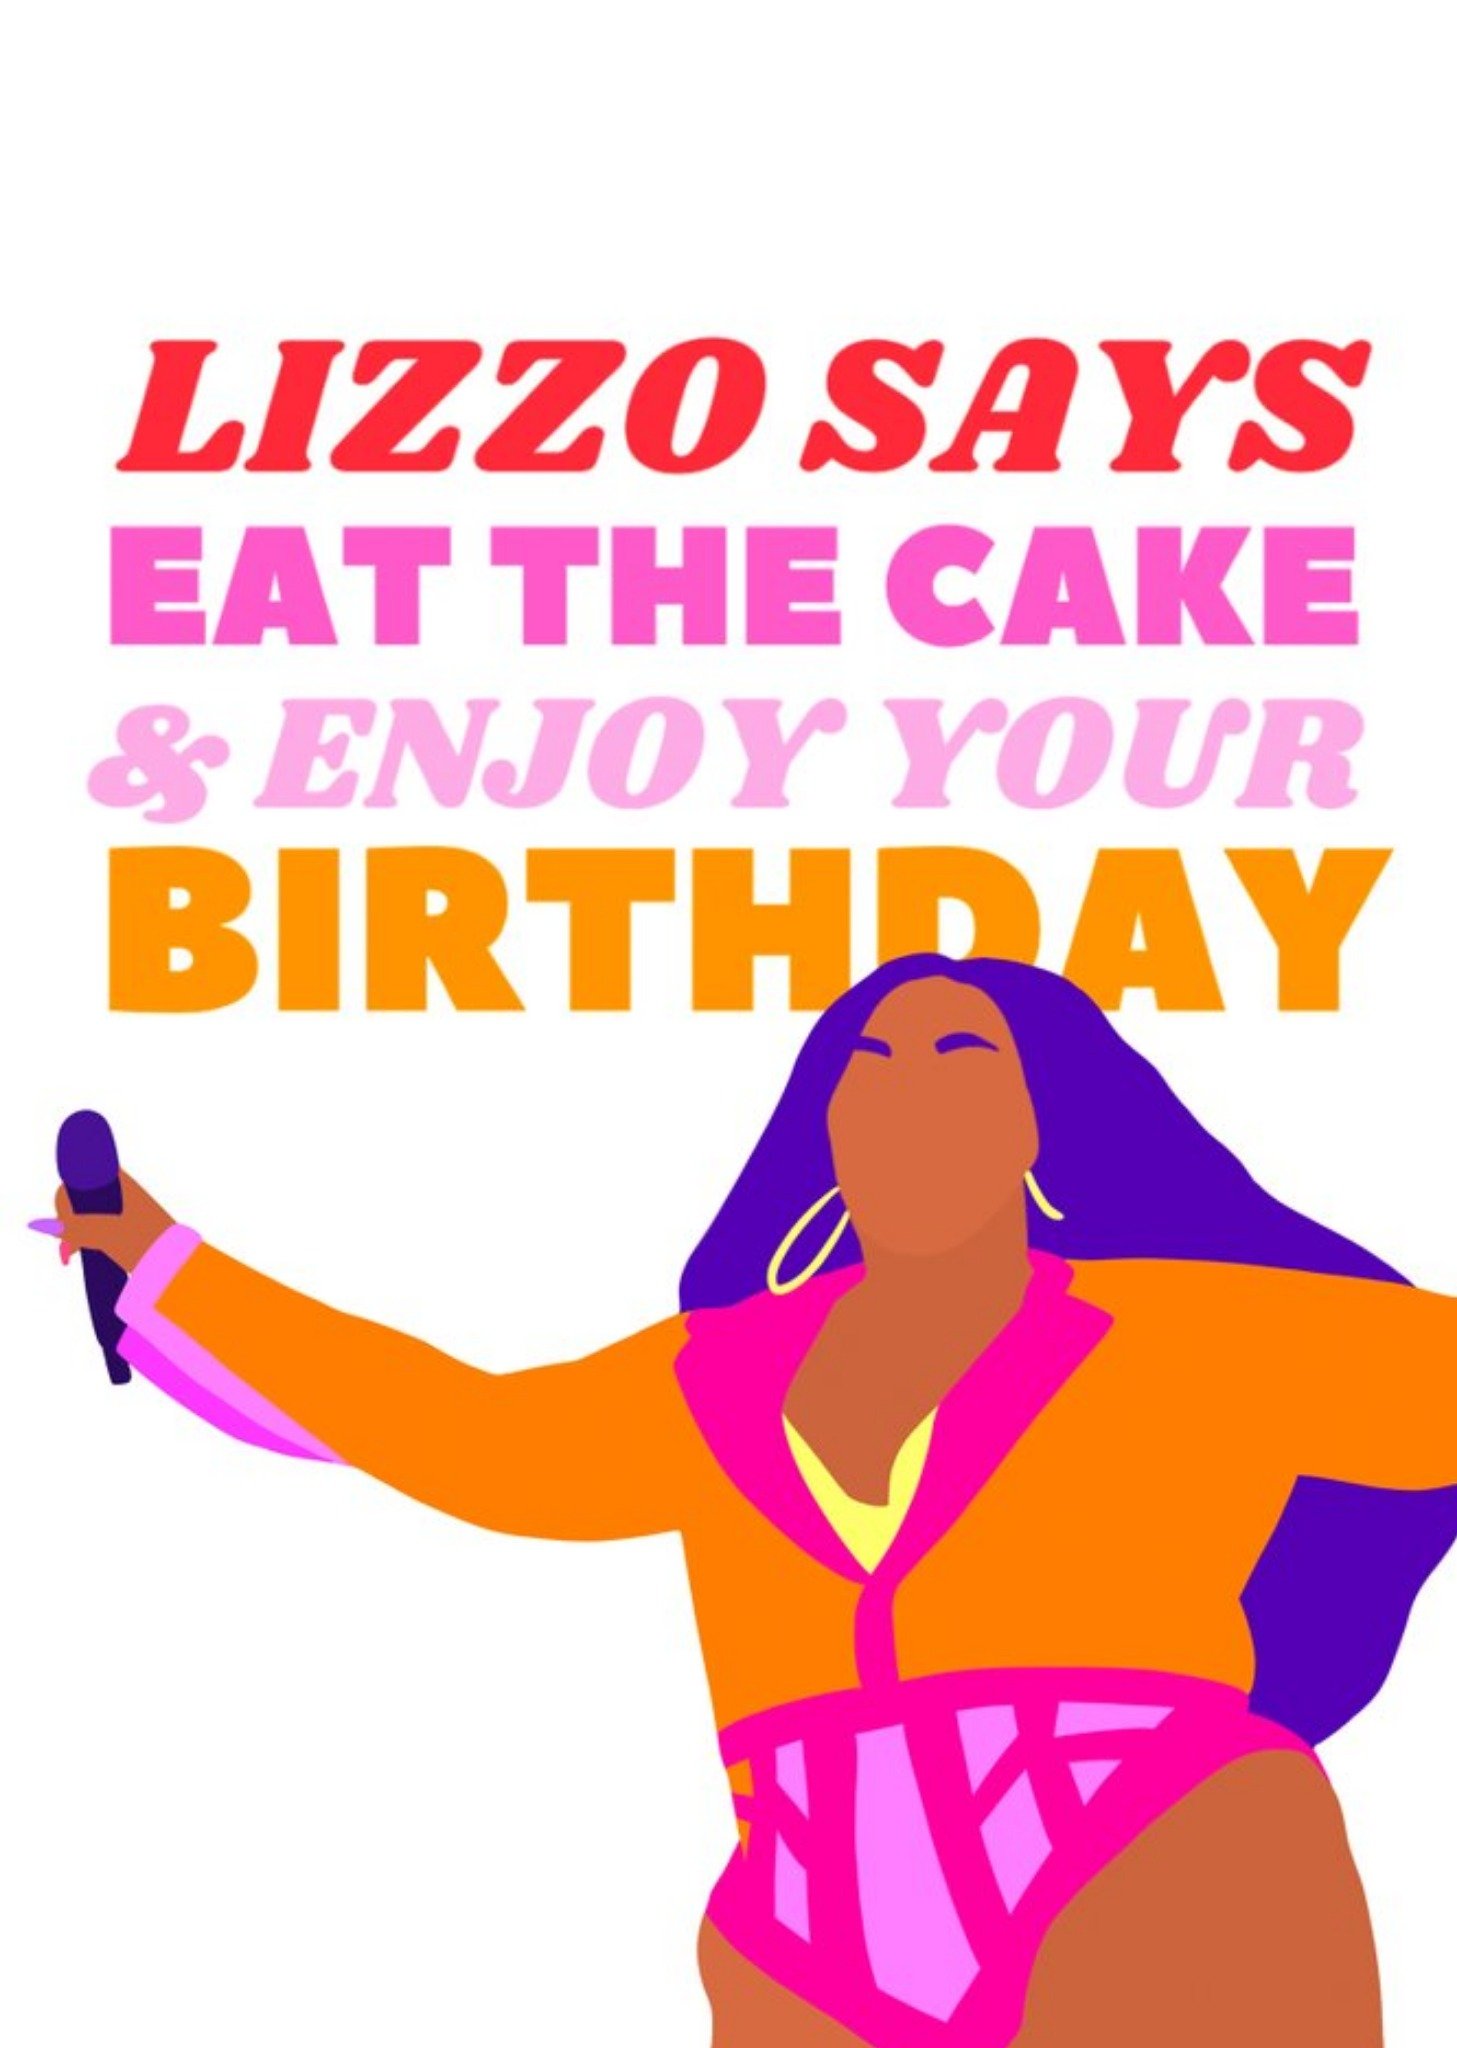 Friends Floillustrate Illustrated Lizzo Colourful Lettering Cake Funny Card Ecard